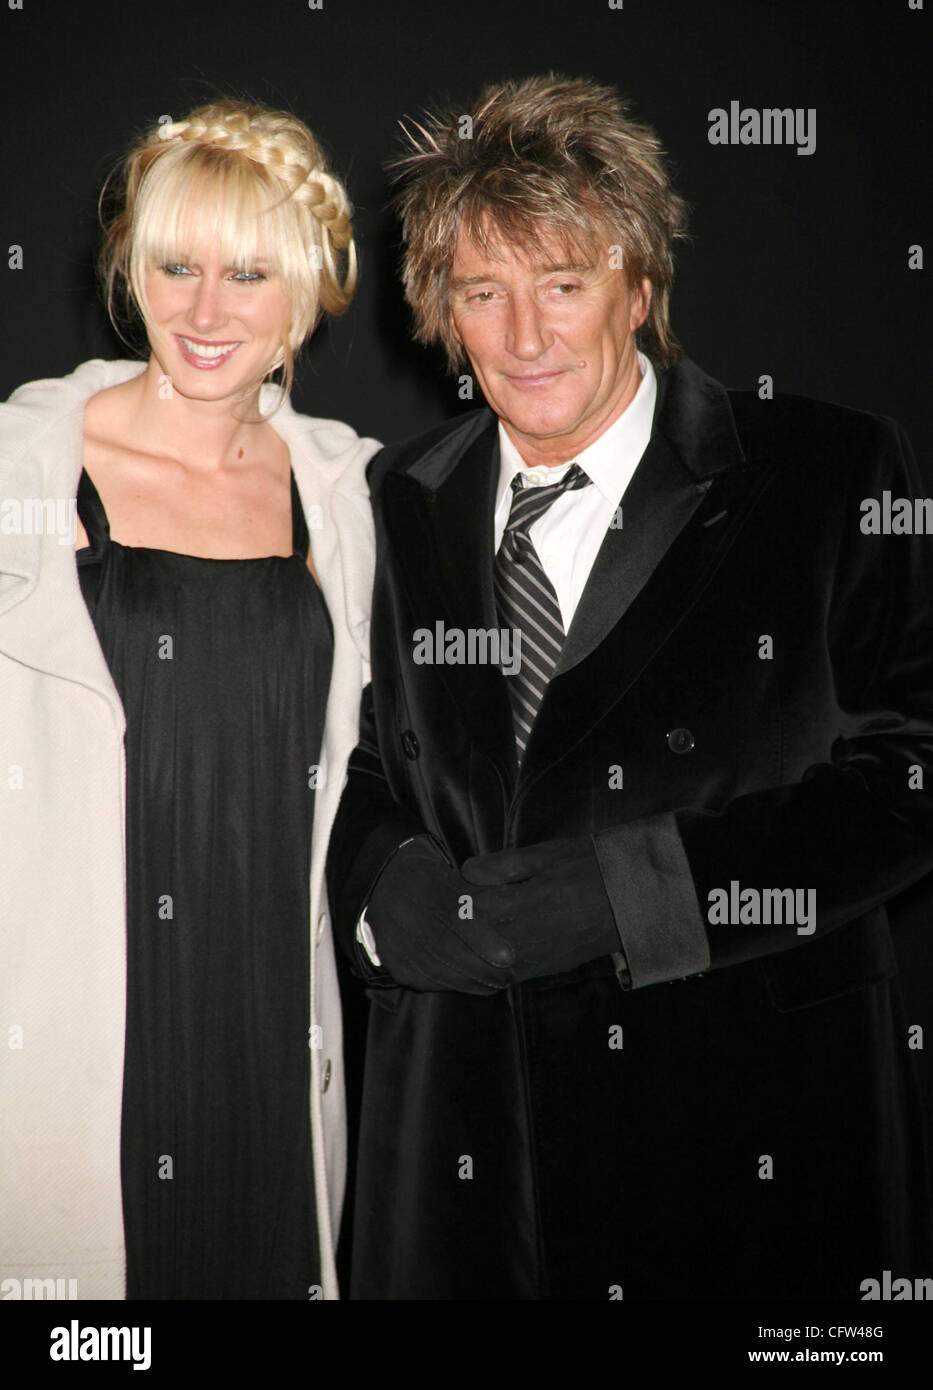 Feb 05, 2007; New York, NY, USA; Singer ROD STEWART and his daughter KIMBERLY STEWART at the arrivals for the Marc Jacobs fashion show held during Mercedes-Benz Fashion Week Fall 2007 at the  Lexington Armory. Mandatory Credit: Photo by Nancy Kaszerman/ZUMA Press. (?) Copyright 2007 by Nancy Kaszerm Stock Photo